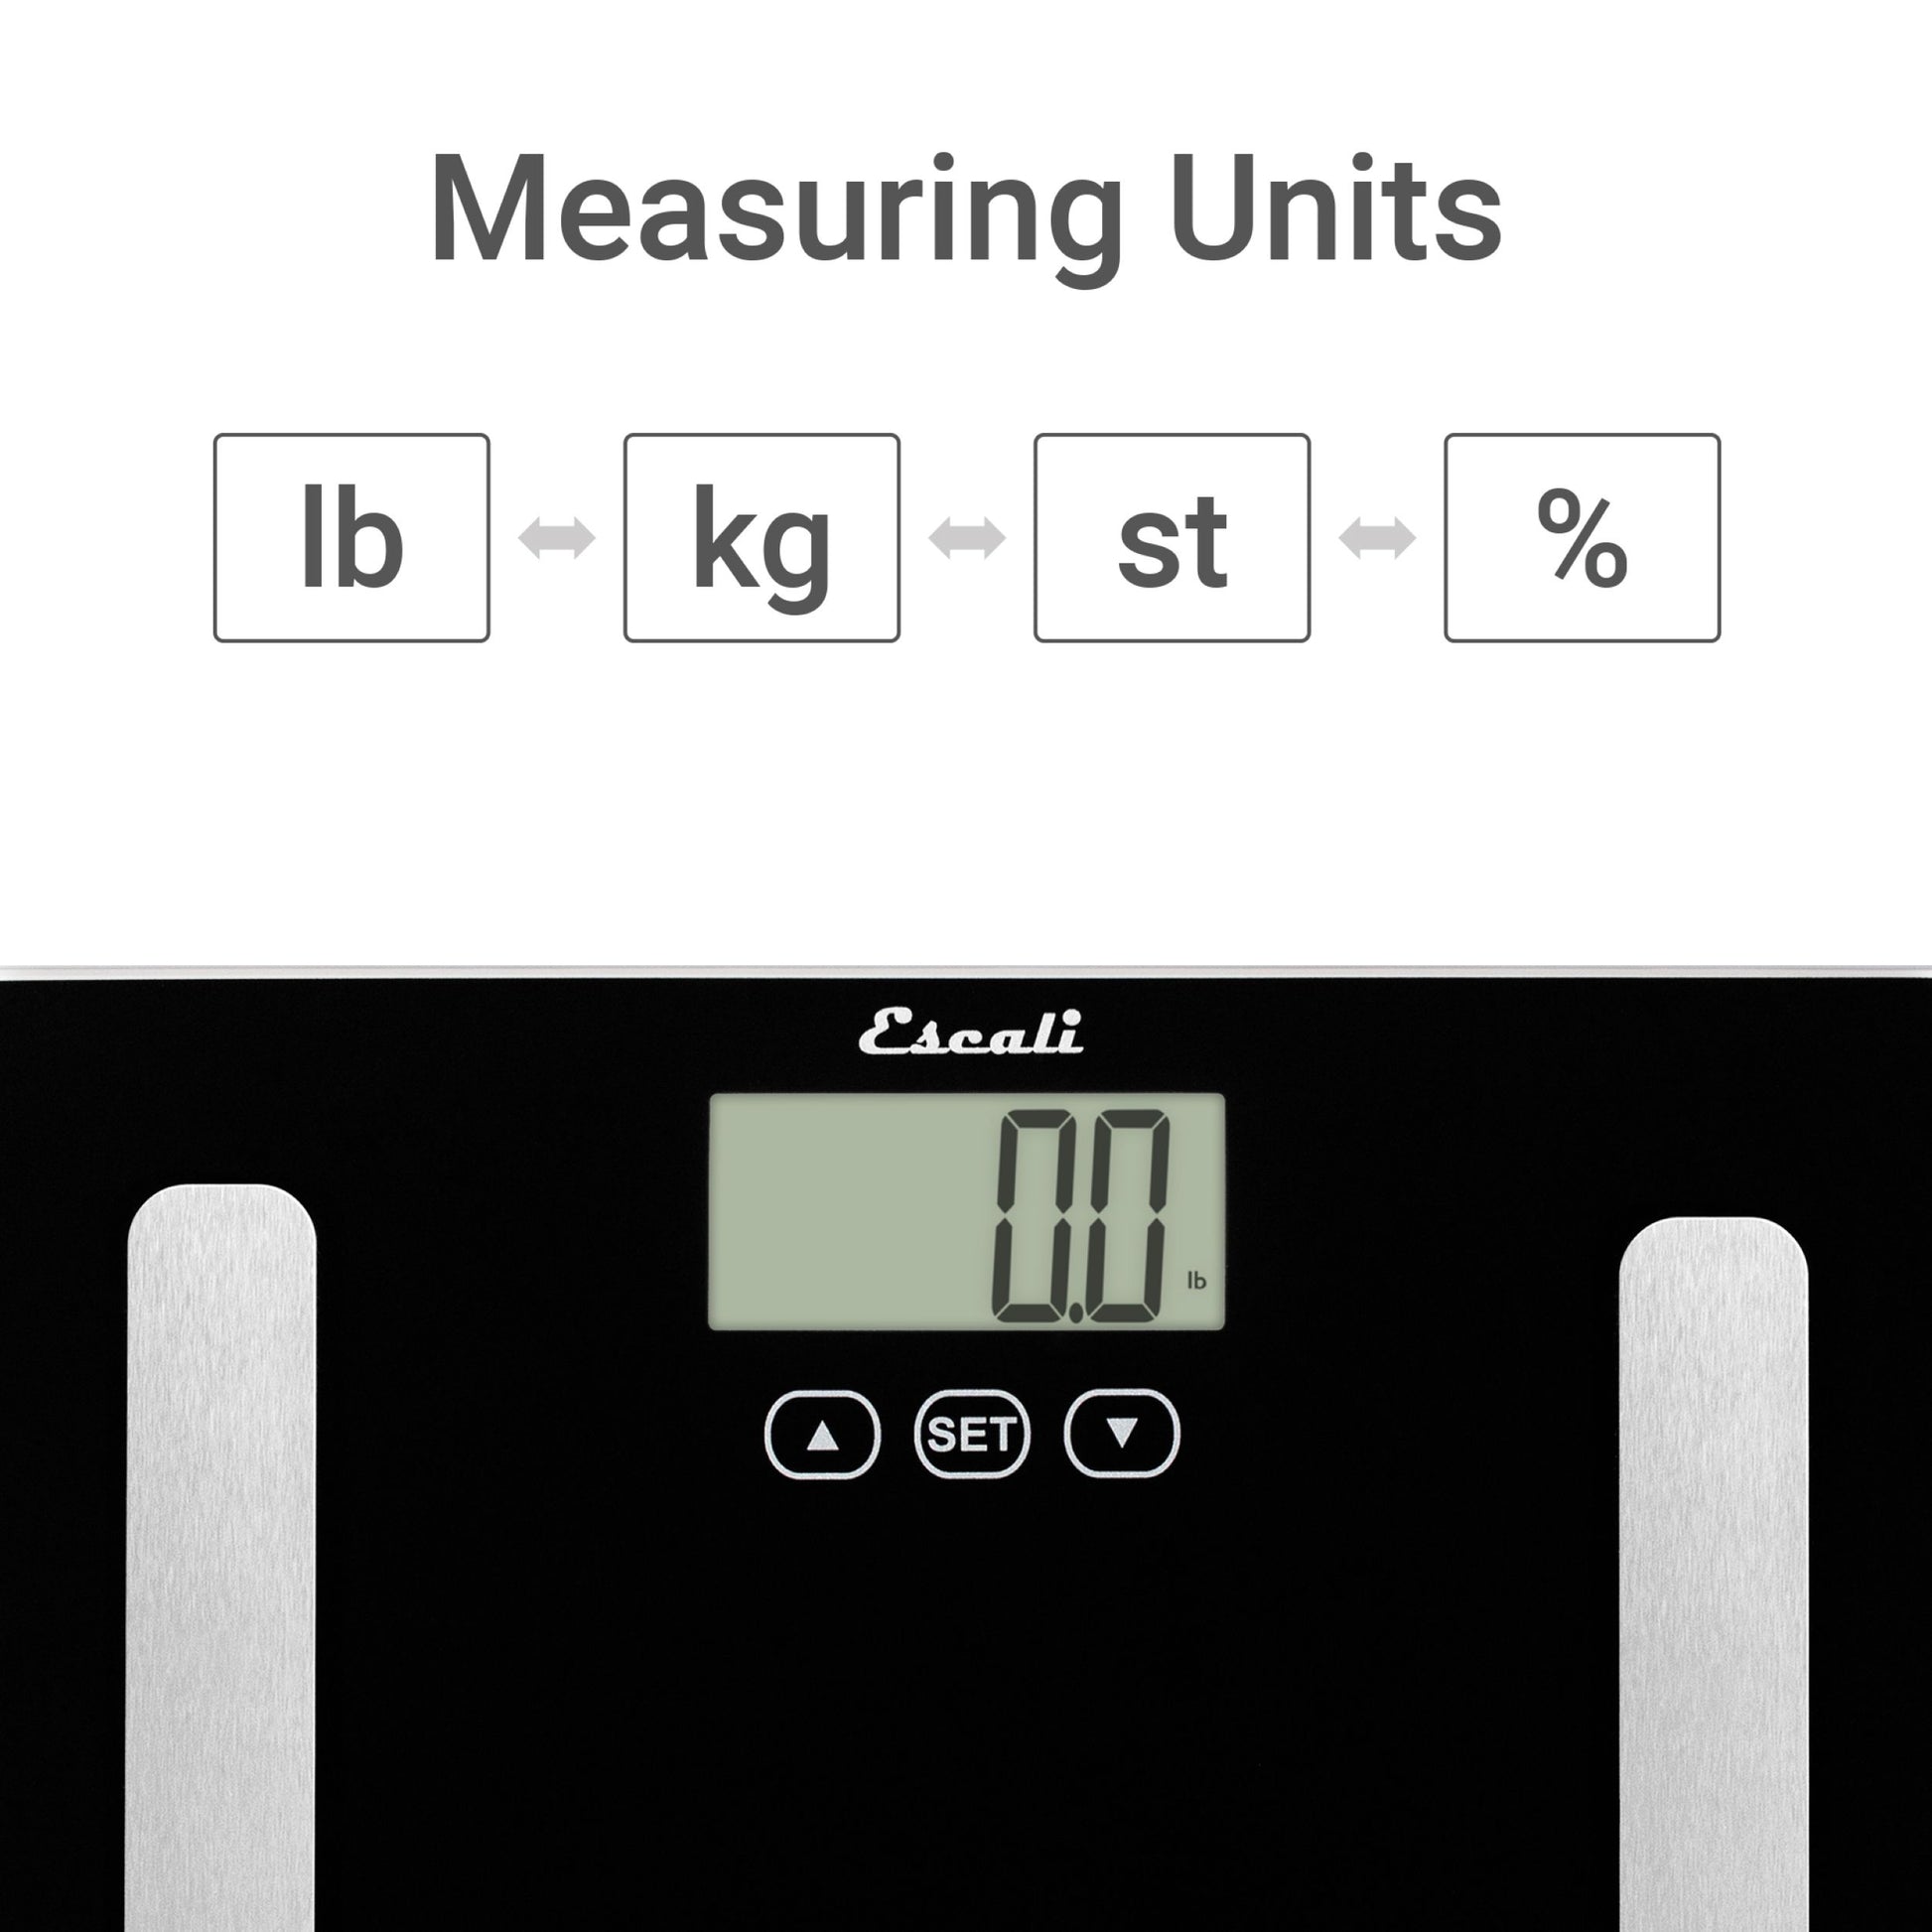 Understanding The Use of Body Fat Scales and Nutritional Choices by  Kimflyangel2 - Issuu